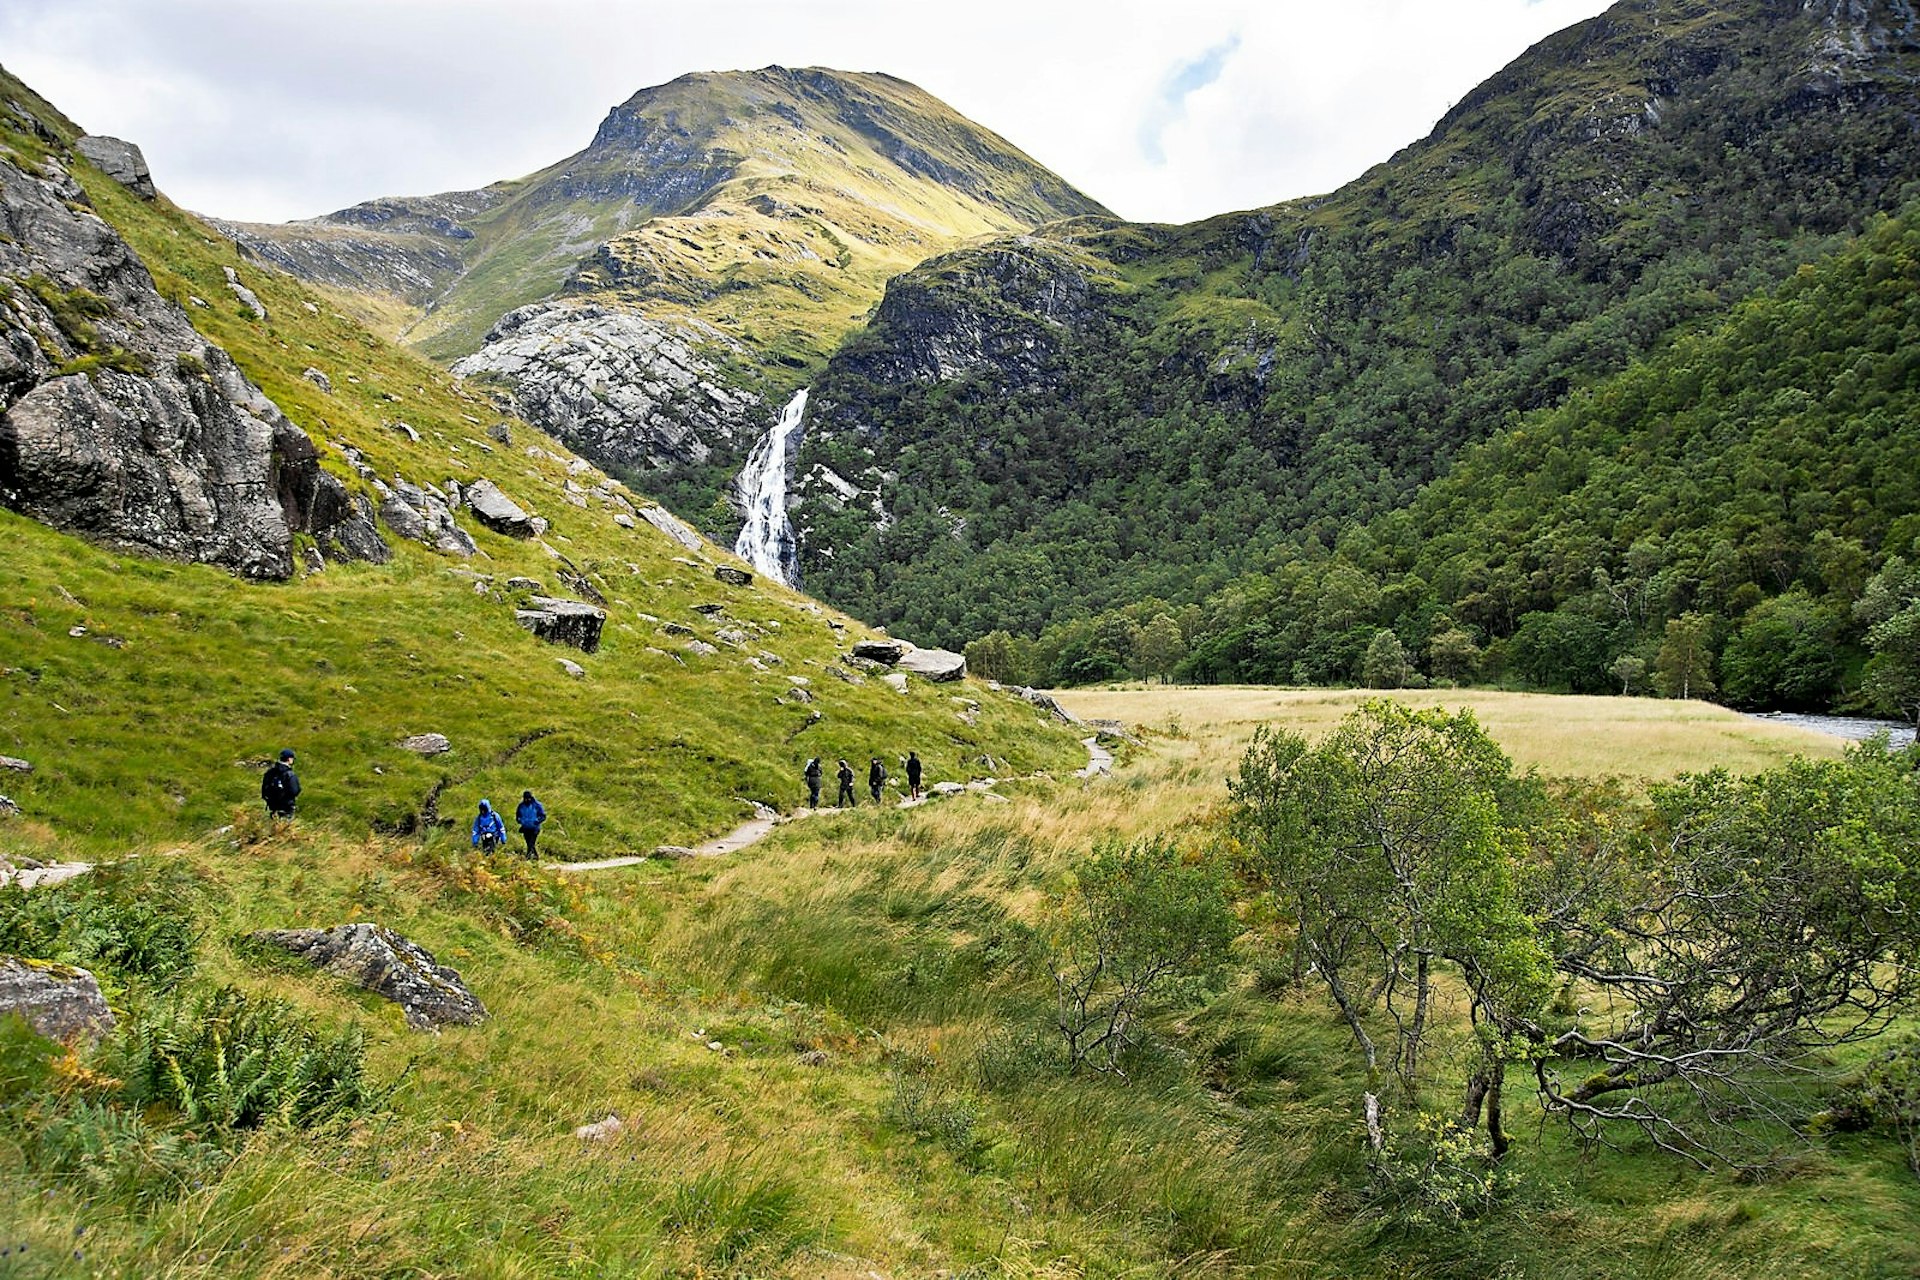 Even if you're not up to scaling Ben Nevis, a stroll through Glen Nevis repays the effort © luis abrantes / Shutterstock